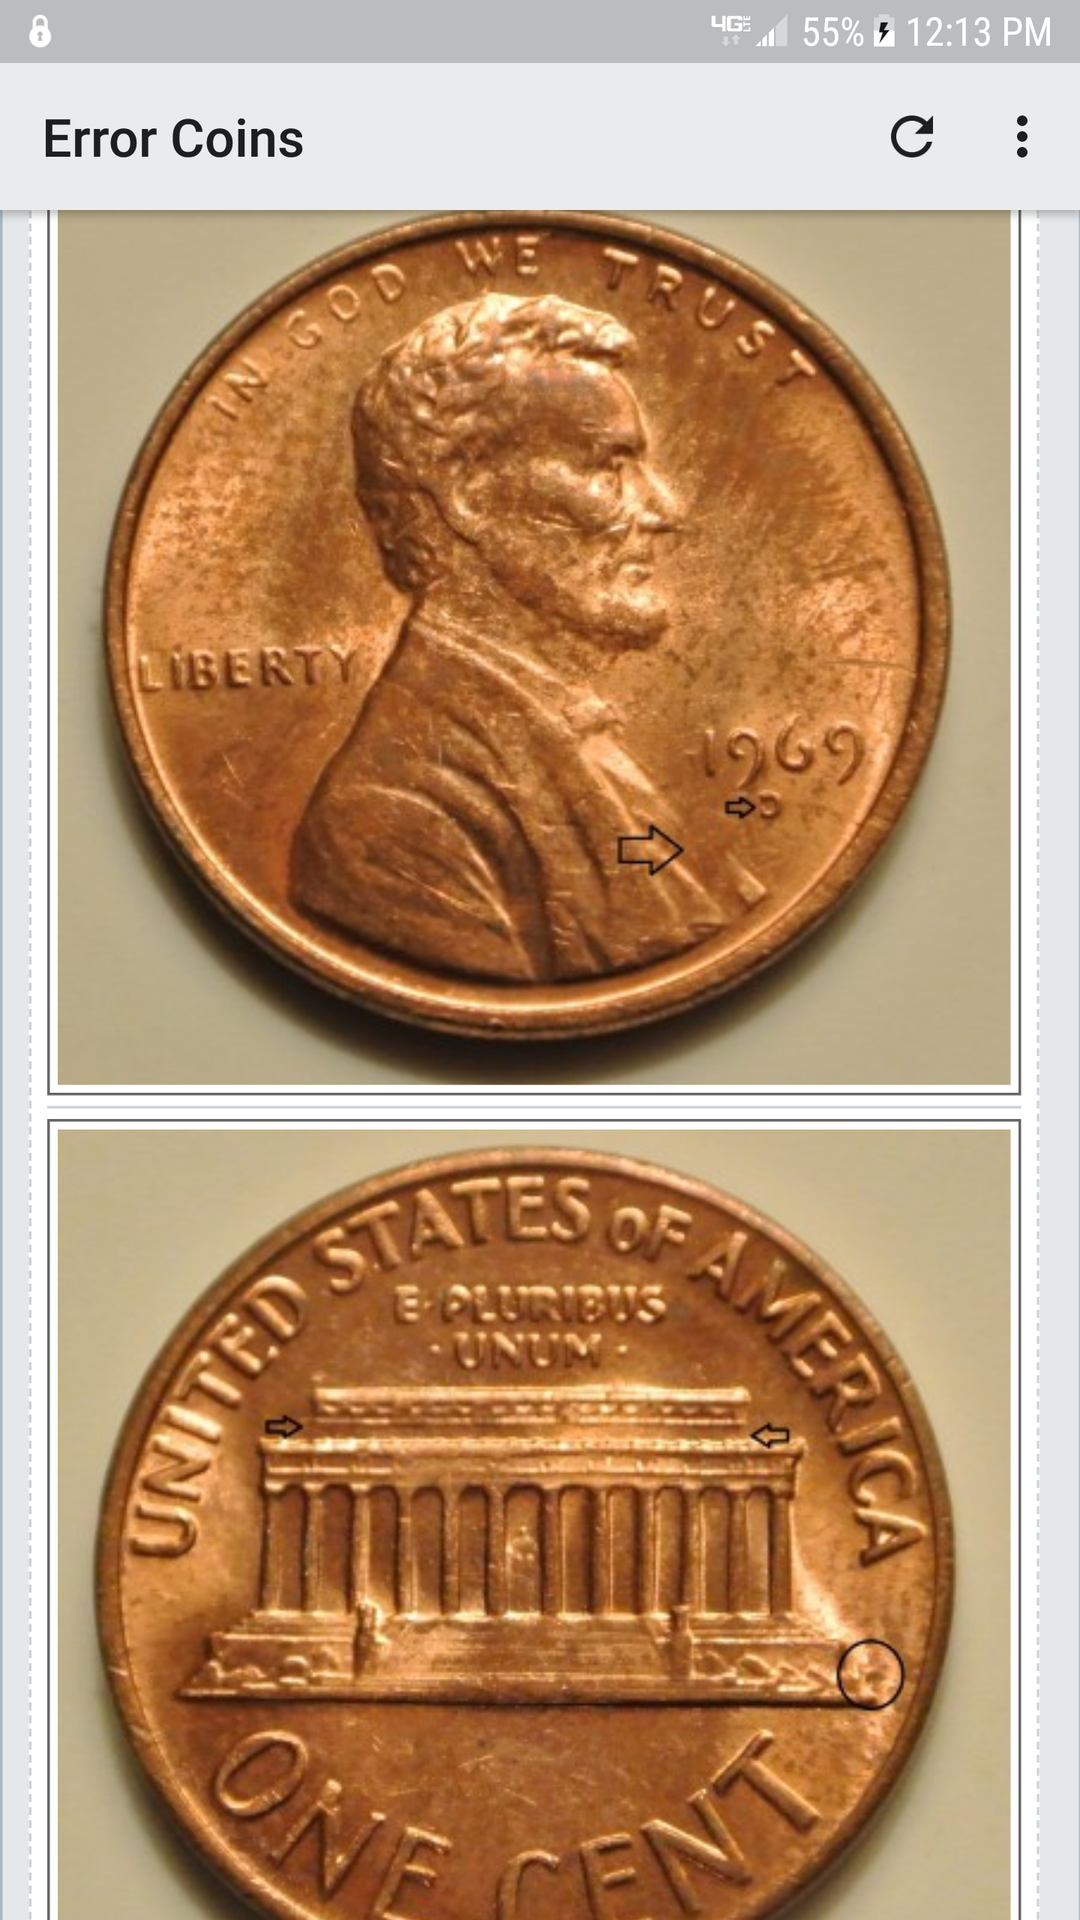 1969 D Penny That Does Have A Floating Roof Coin Talk,Types Of Cacti